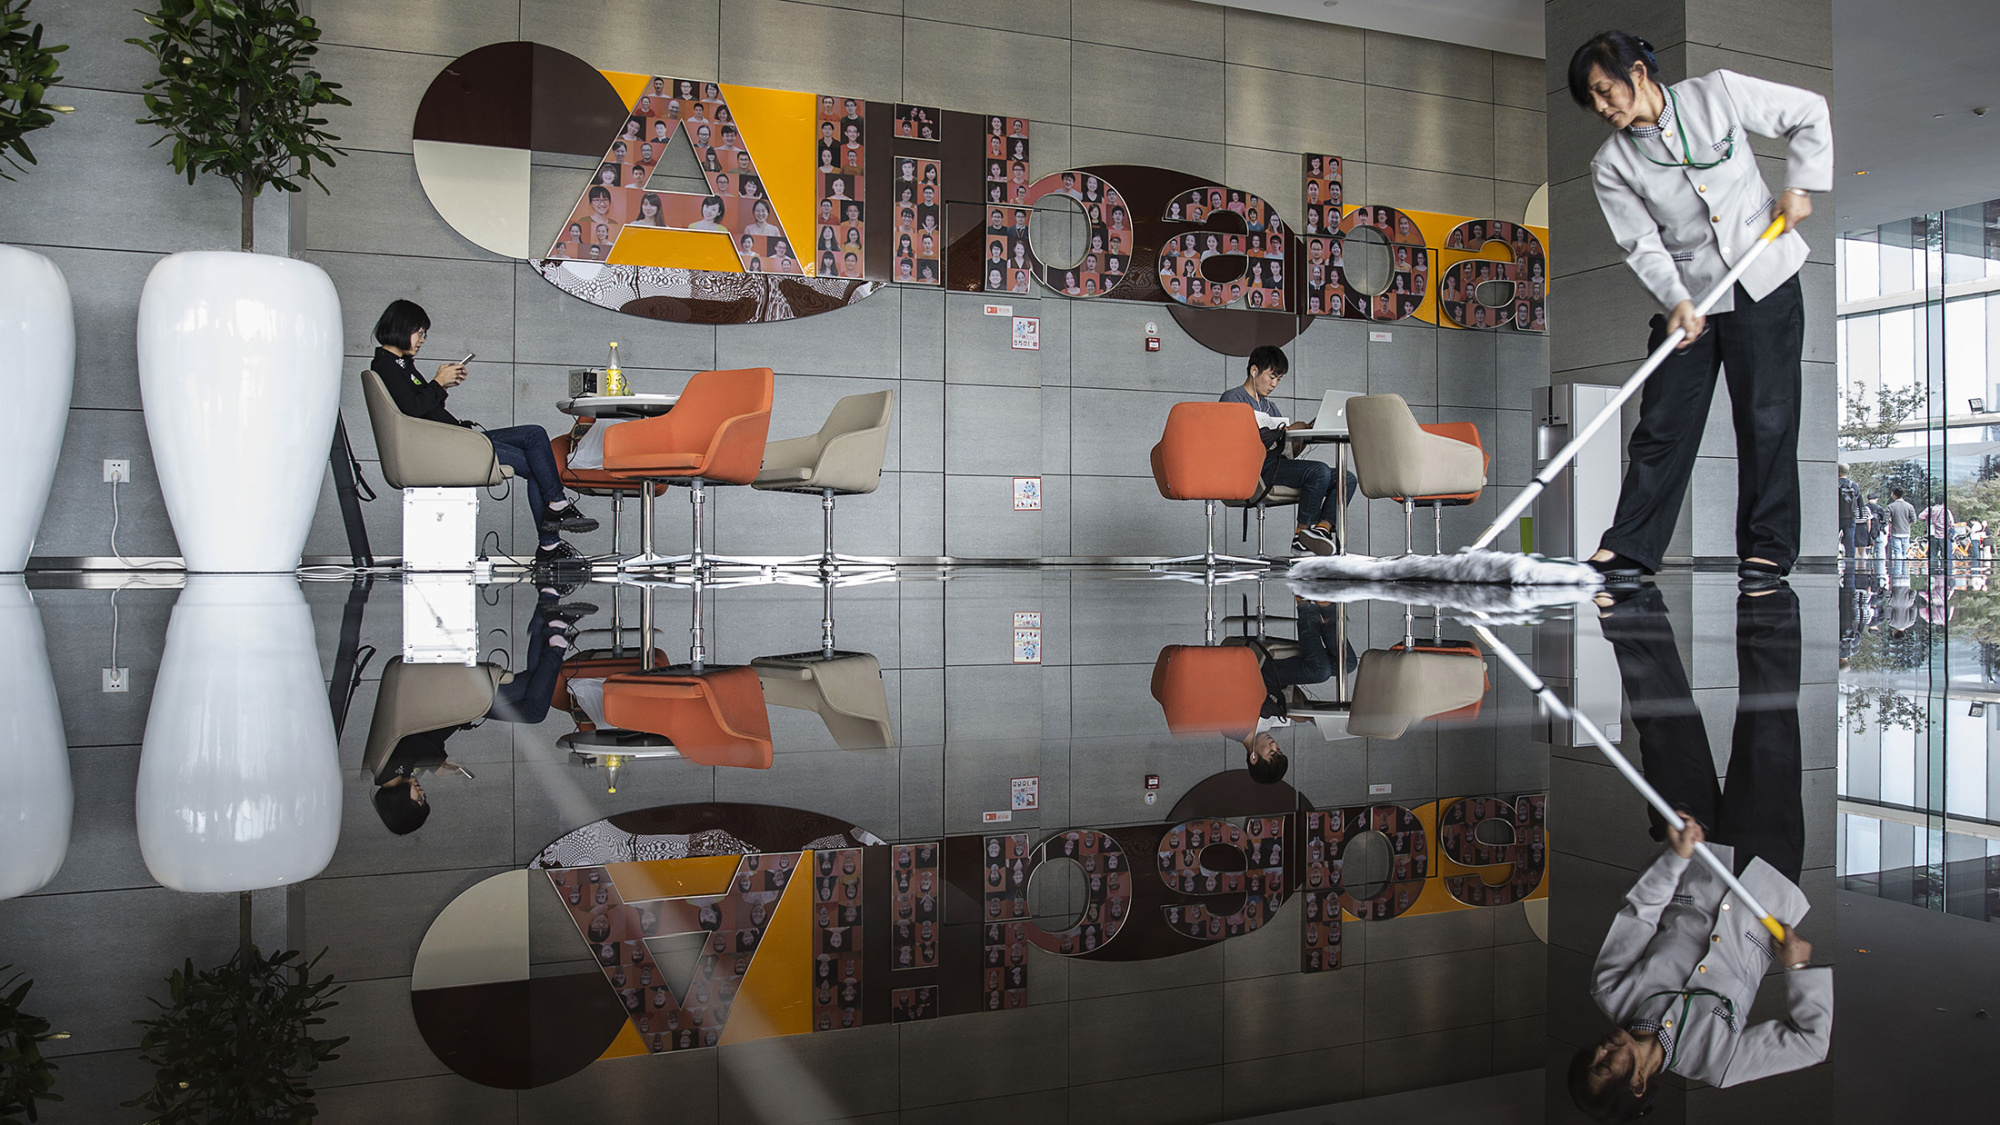 An employee mops the floor in a building lobby at the Alibaba Group Holding Ltd. headquarters in Hangzhou, China.
